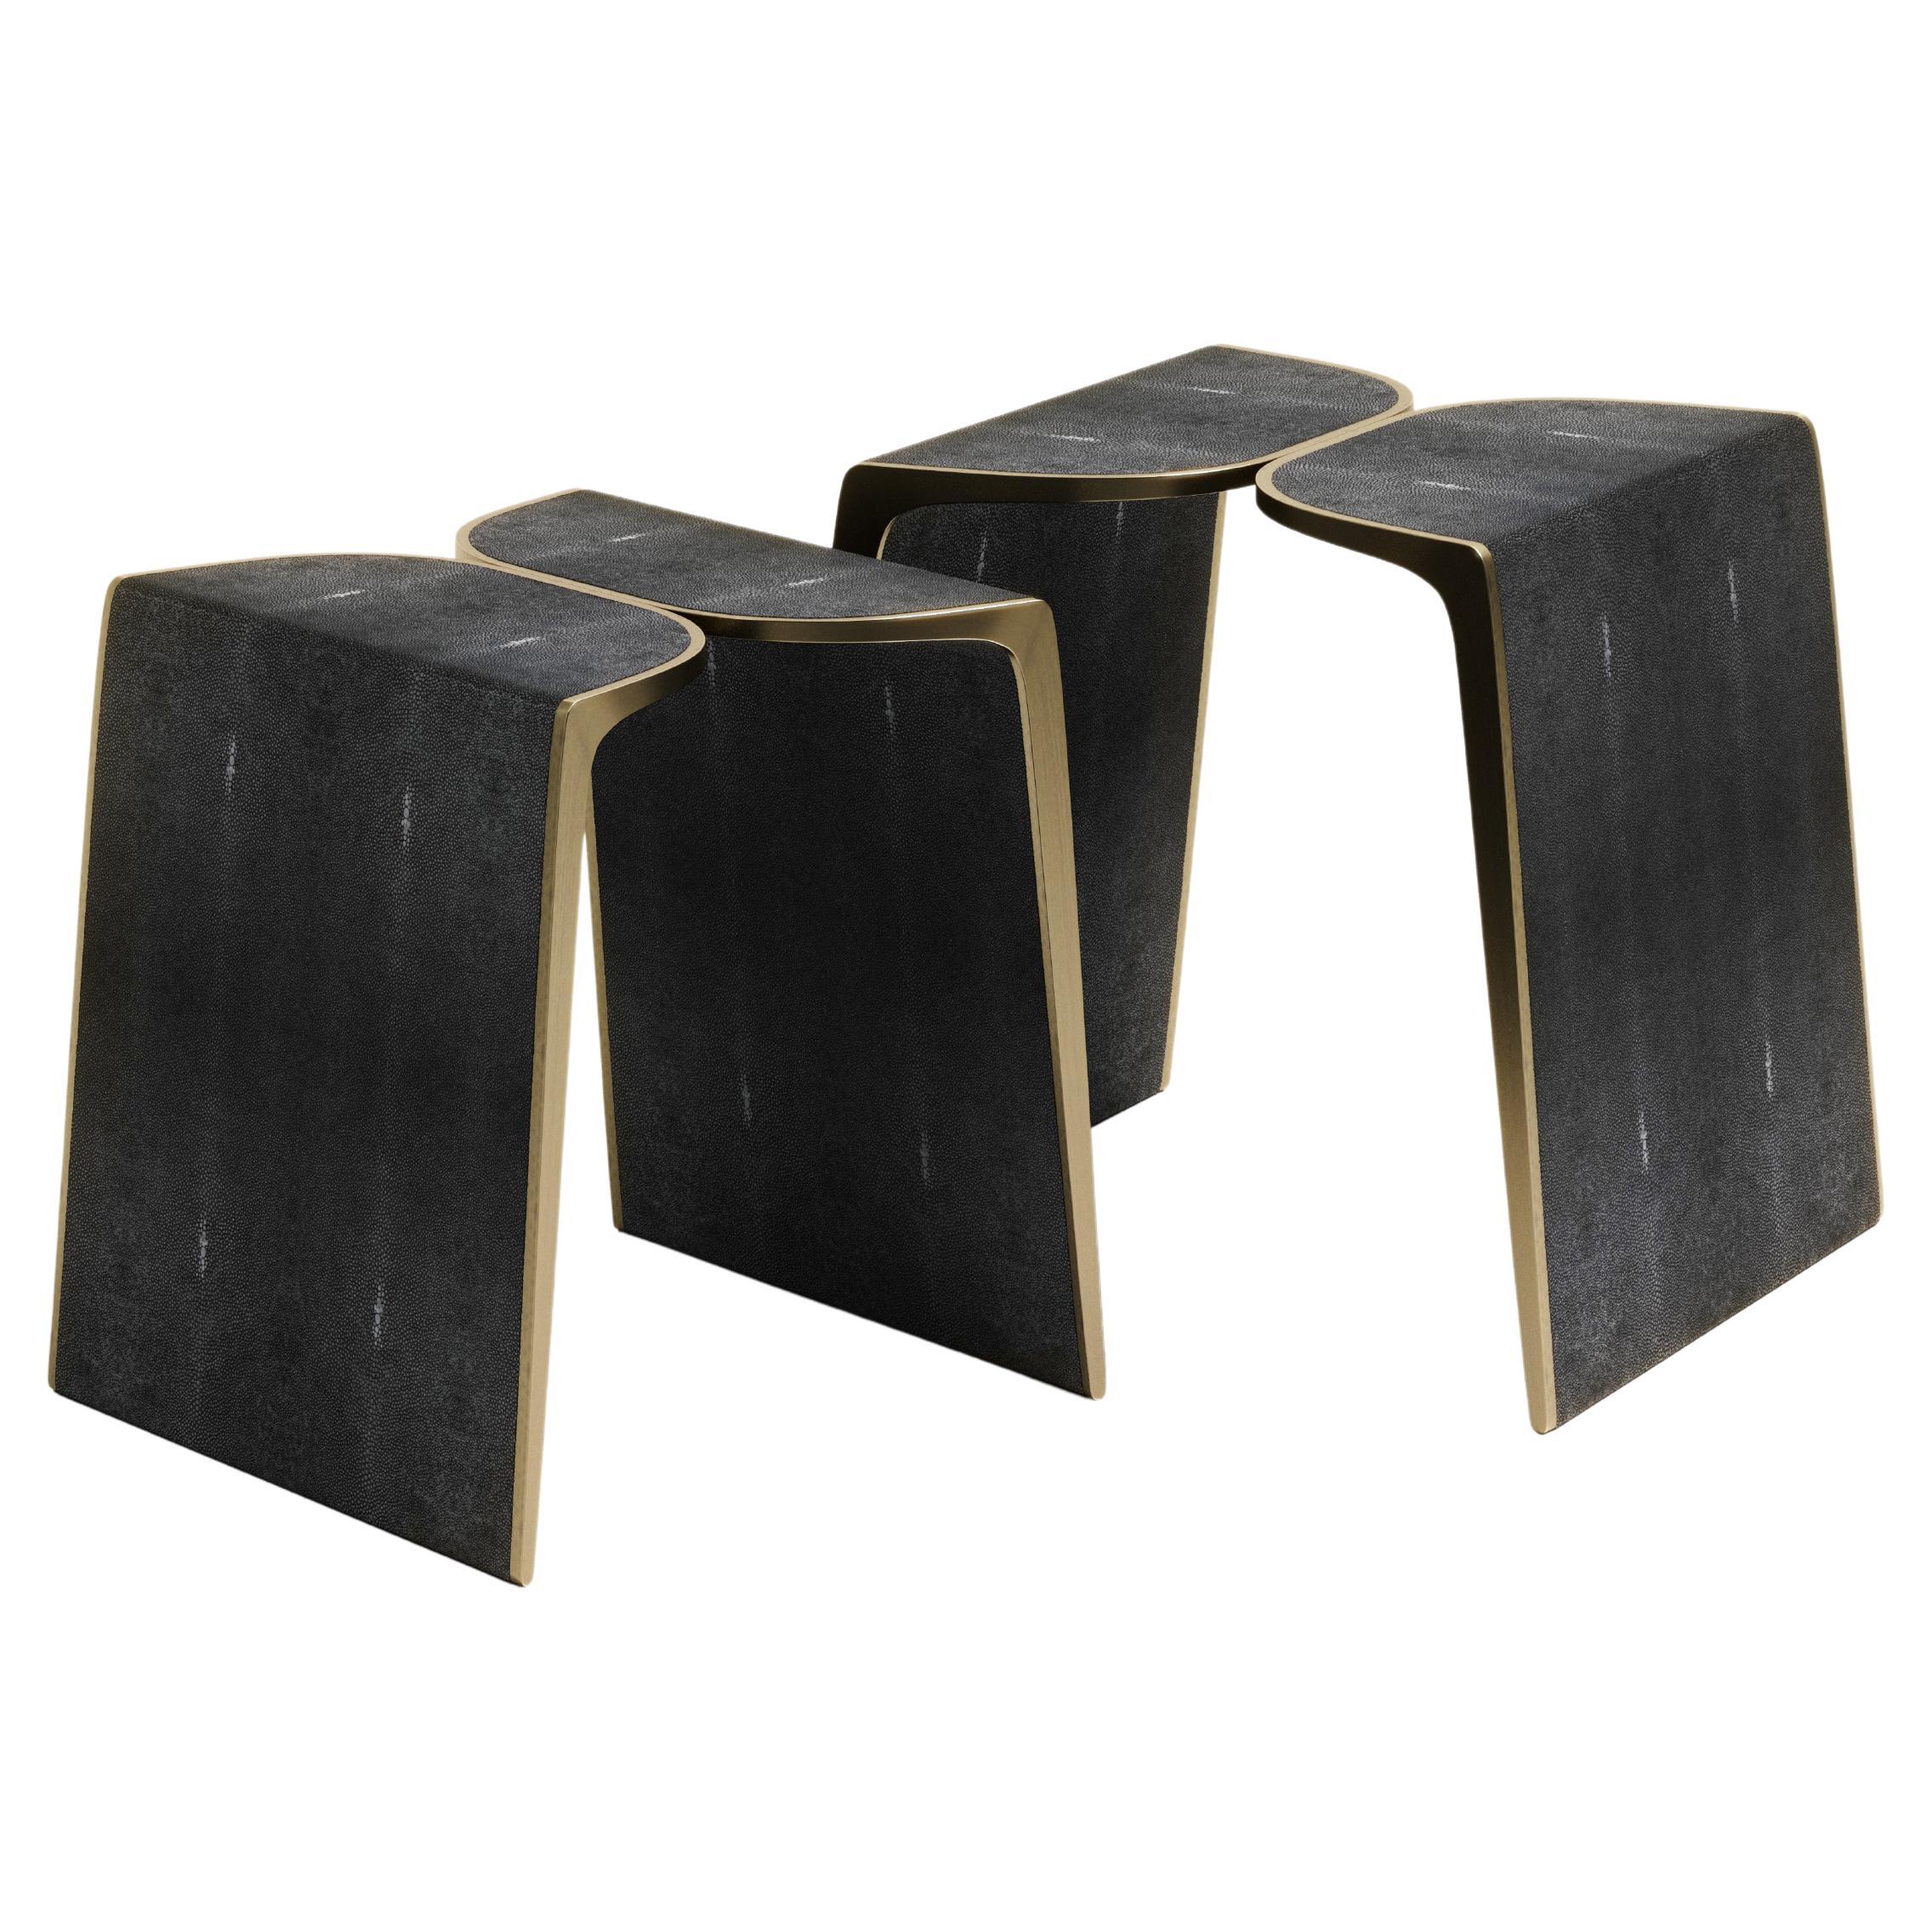 Nesting Shagreen Side Tables with Bronze Patina Brass Details by Kifu Paris